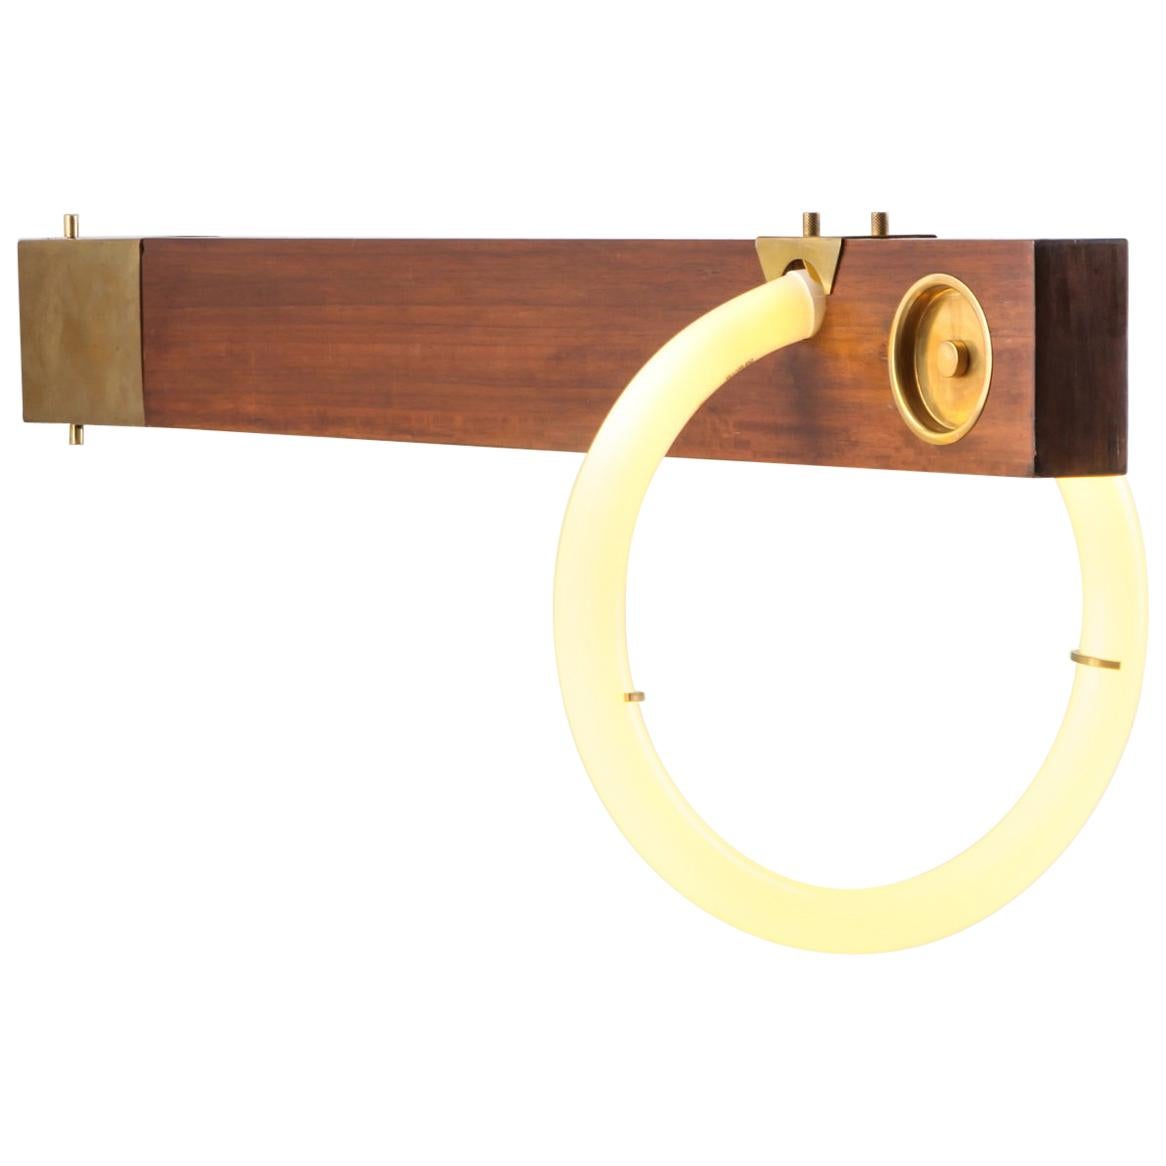 Angelo Brotto neon wall light in walnut and brass